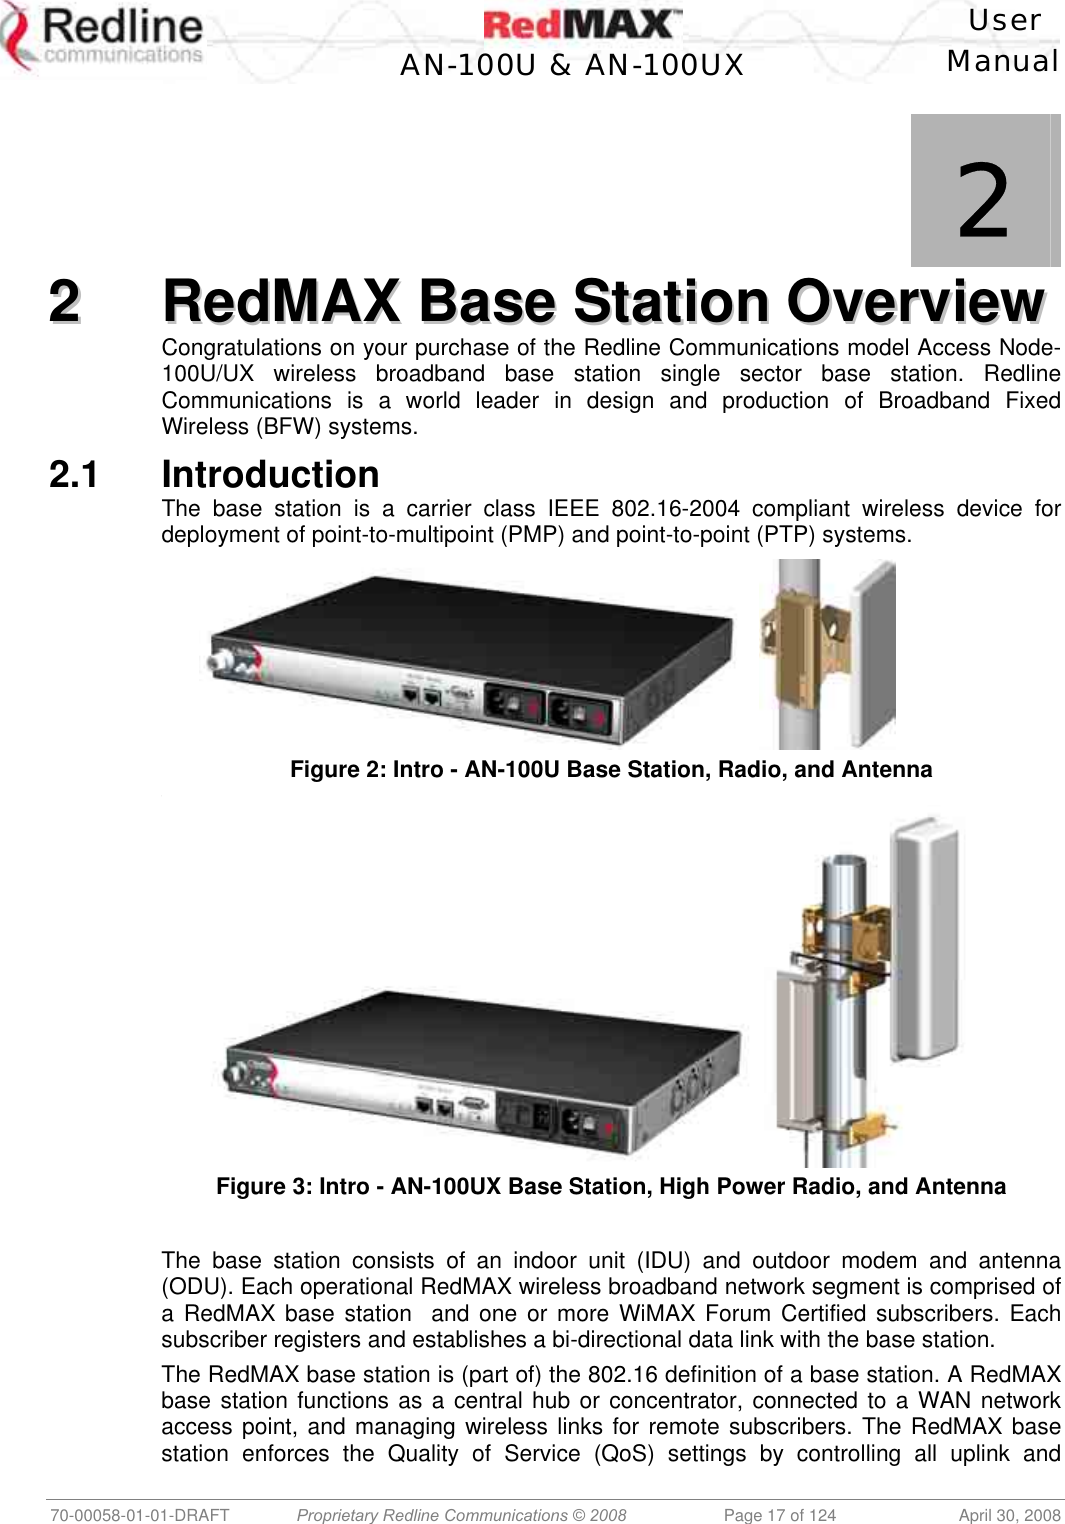    User  AN-100U &amp; AN-100UX Manual   70-00058-01-01-DRAFT  Proprietary Redline Communications © 2008   Page 17 of 124  April 30, 2008             2 22  RReeddMMAAXX  BBaassee  SSttaattiioonn  OOvveerrvviieeww  Congratulations on your purchase of the Redline Communications model Access Node-100U/UX wireless broadband base station single sector base station. Redline Communications is a world leader in design and production of Broadband Fixed Wireless (BFW) systems. 2.1 Introduction The base station is a carrier class IEEE 802.16-2004 compliant wireless device for deployment of point-to-multipoint (PMP) and point-to-point (PTP) systems.      Figure 2: Intro - AN-100U Base Station, Radio, and Antenna ,  Figure 3: Intro - AN-100UX Base Station, High Power Radio, and Antenna  The base station consists of an indoor unit (IDU) and outdoor modem and antenna (ODU). Each operational RedMAX wireless broadband network segment is comprised of a RedMAX base station  and one or more WiMAX Forum Certified subscribers. Each subscriber registers and establishes a bi-directional data link with the base station. The RedMAX base station is (part of) the 802.16 definition of a base station. A RedMAX base station functions as a central hub or concentrator, connected to a WAN network access point, and managing wireless links for remote subscribers. The RedMAX base station enforces the Quality of Service (QoS) settings by controlling all uplink and 